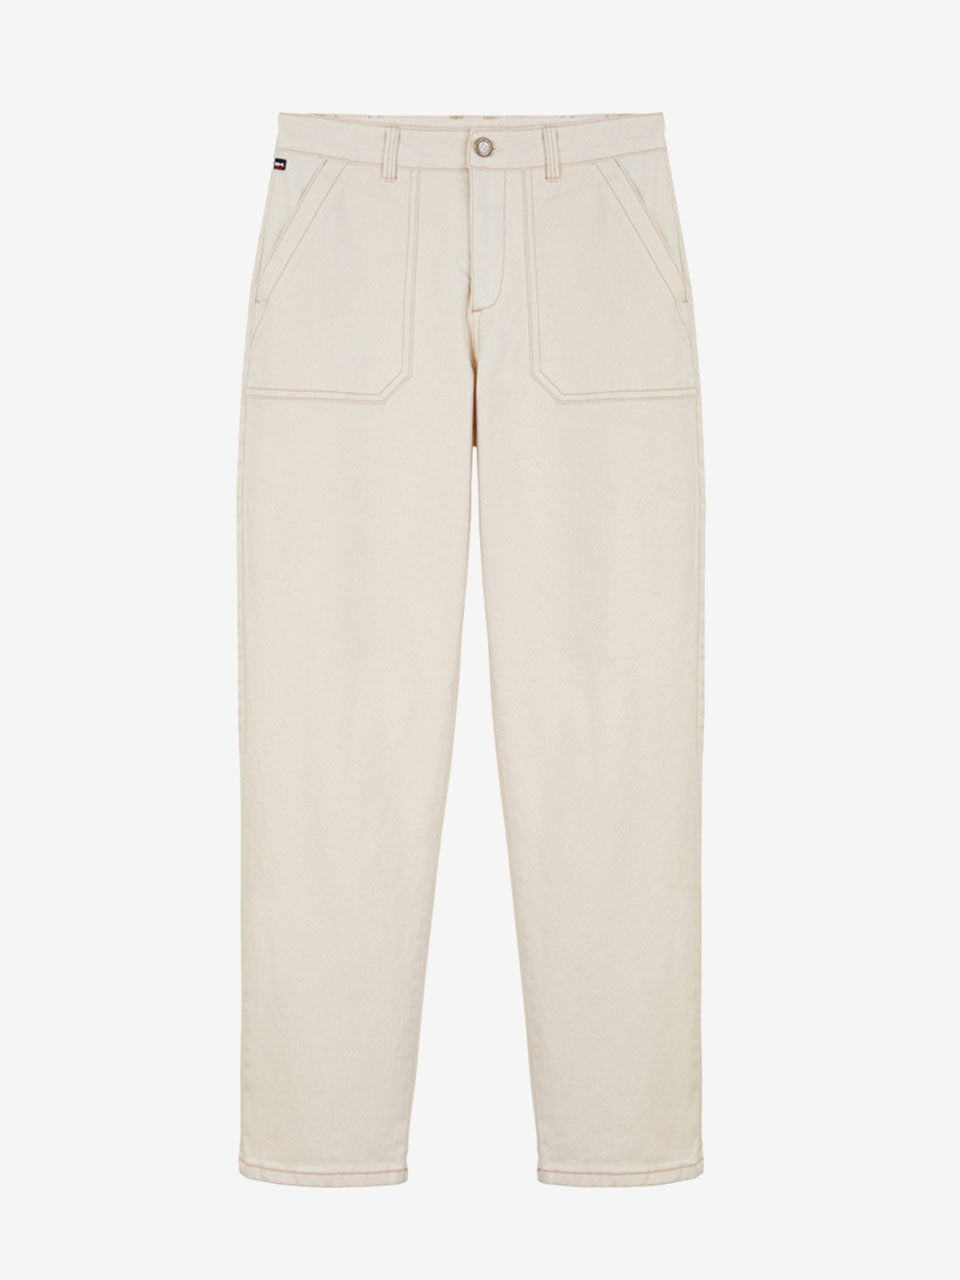 [LIMITED] COLOR PANTS (FOR WOMEN) - CREAM